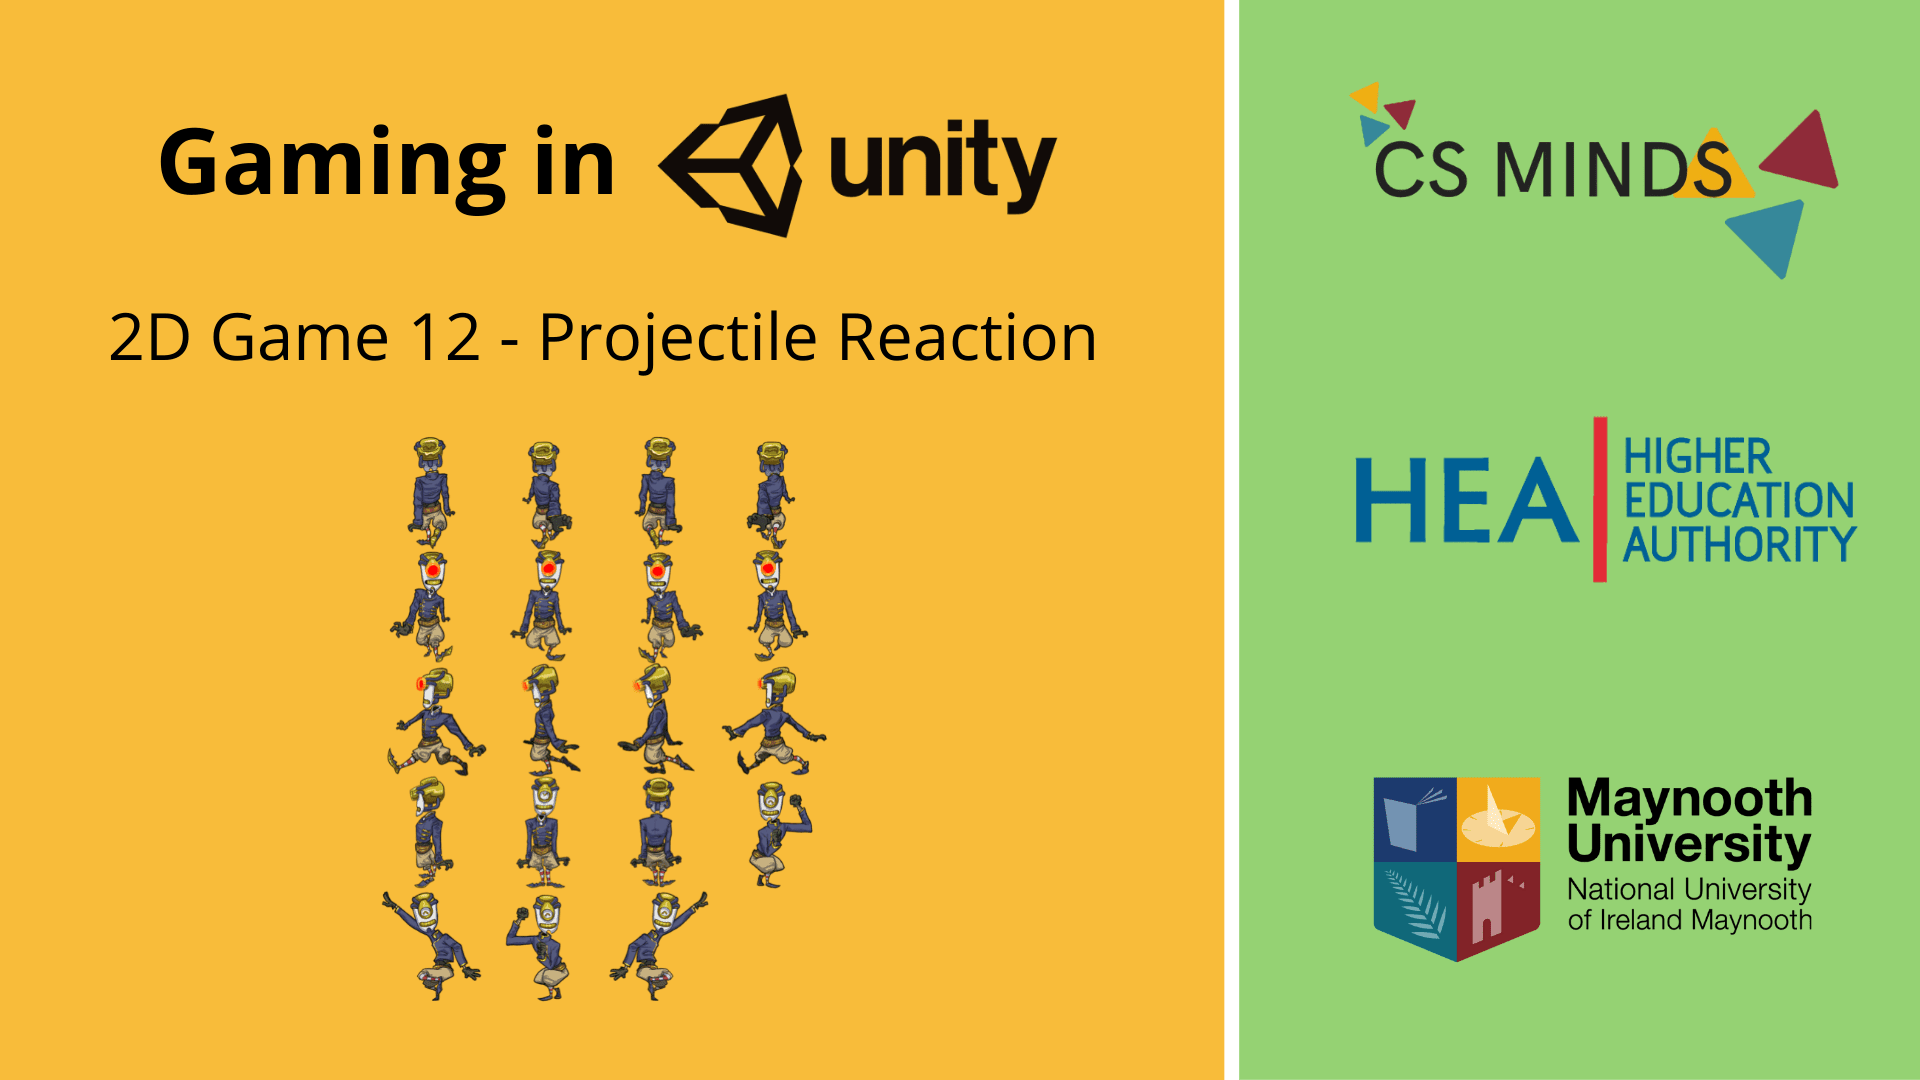 (../img/unity-16-2d-game-12-projectile-reaction/2d-game-12-projectile-reaction-header.png)